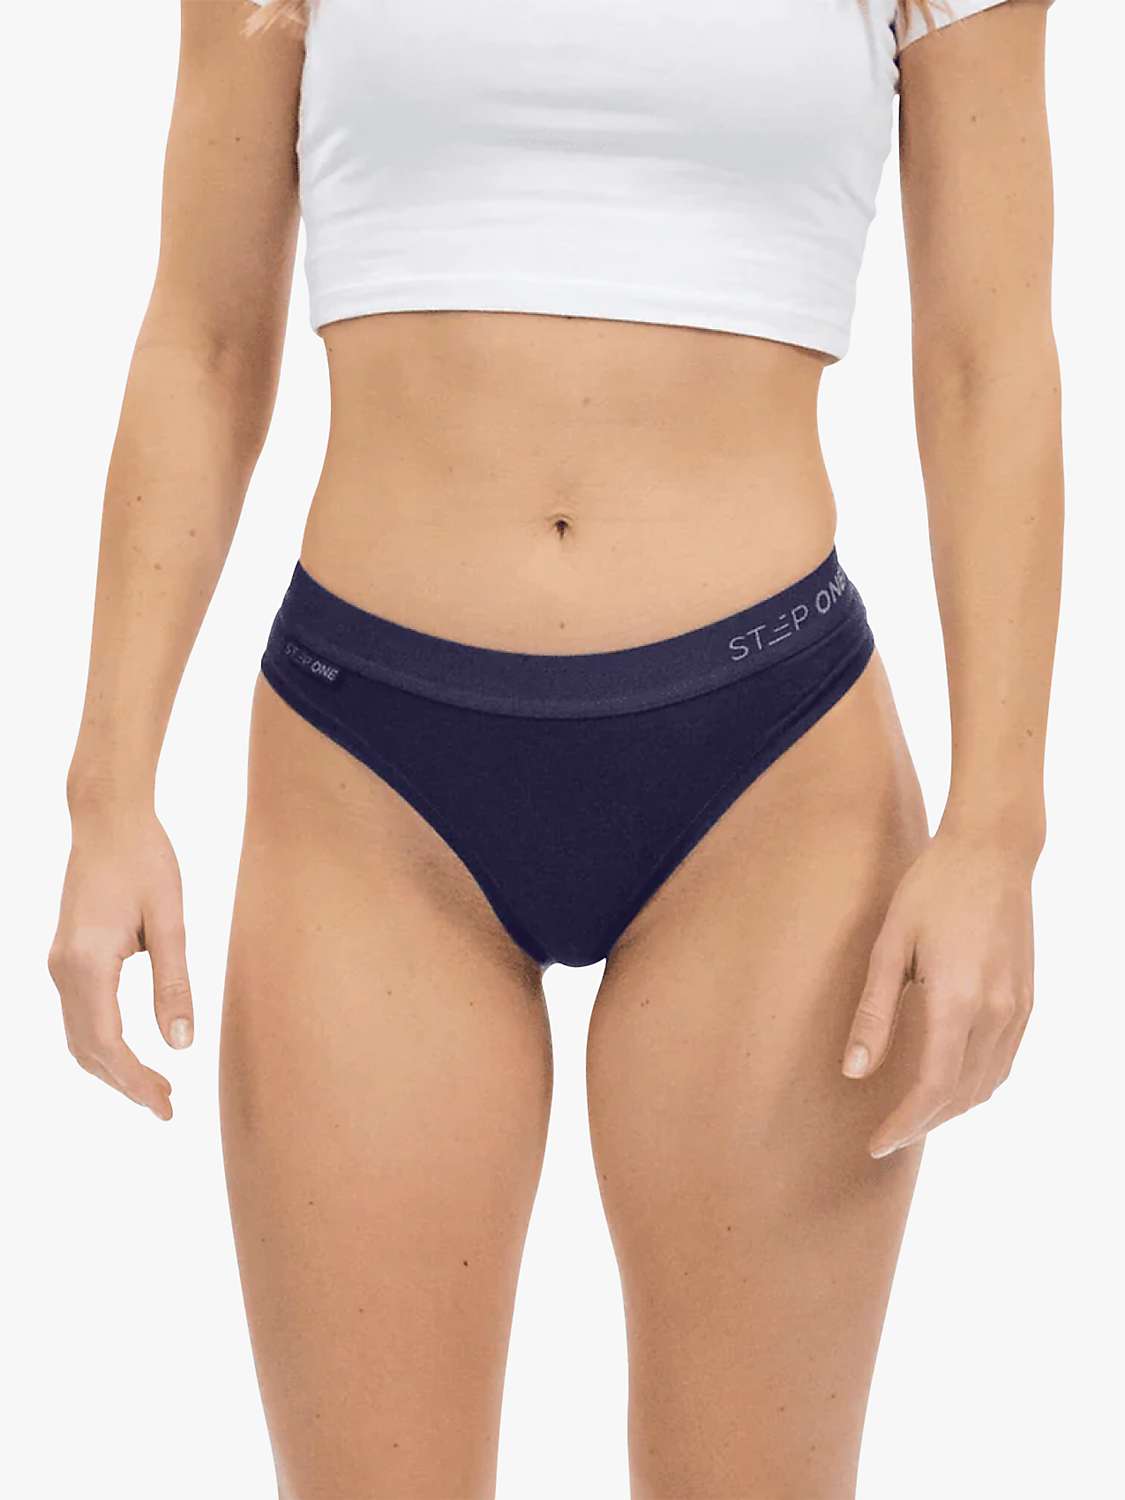 Buy Step One Bamboo Bikini Briefs, Pack of 5 Online at johnlewis.com